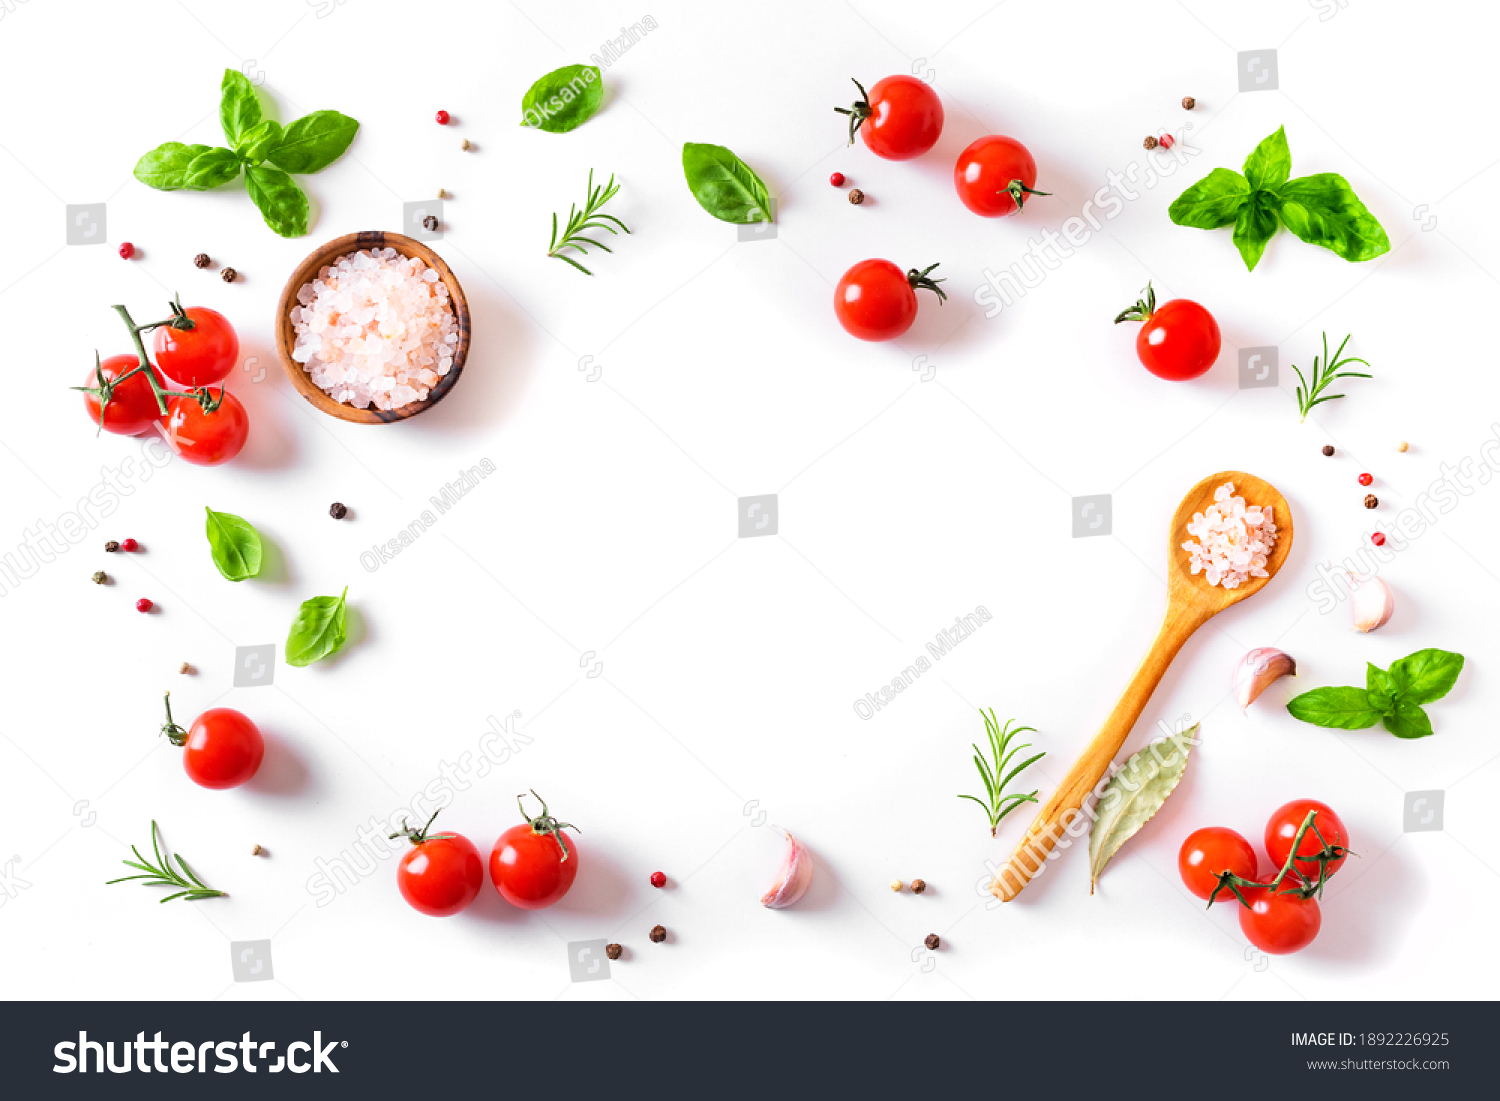 Fresh tomatoes, basil, sea salt and spices frame isolated on white background. Healthy food and vegan raw eating concept, creative flat lay. #1892226925